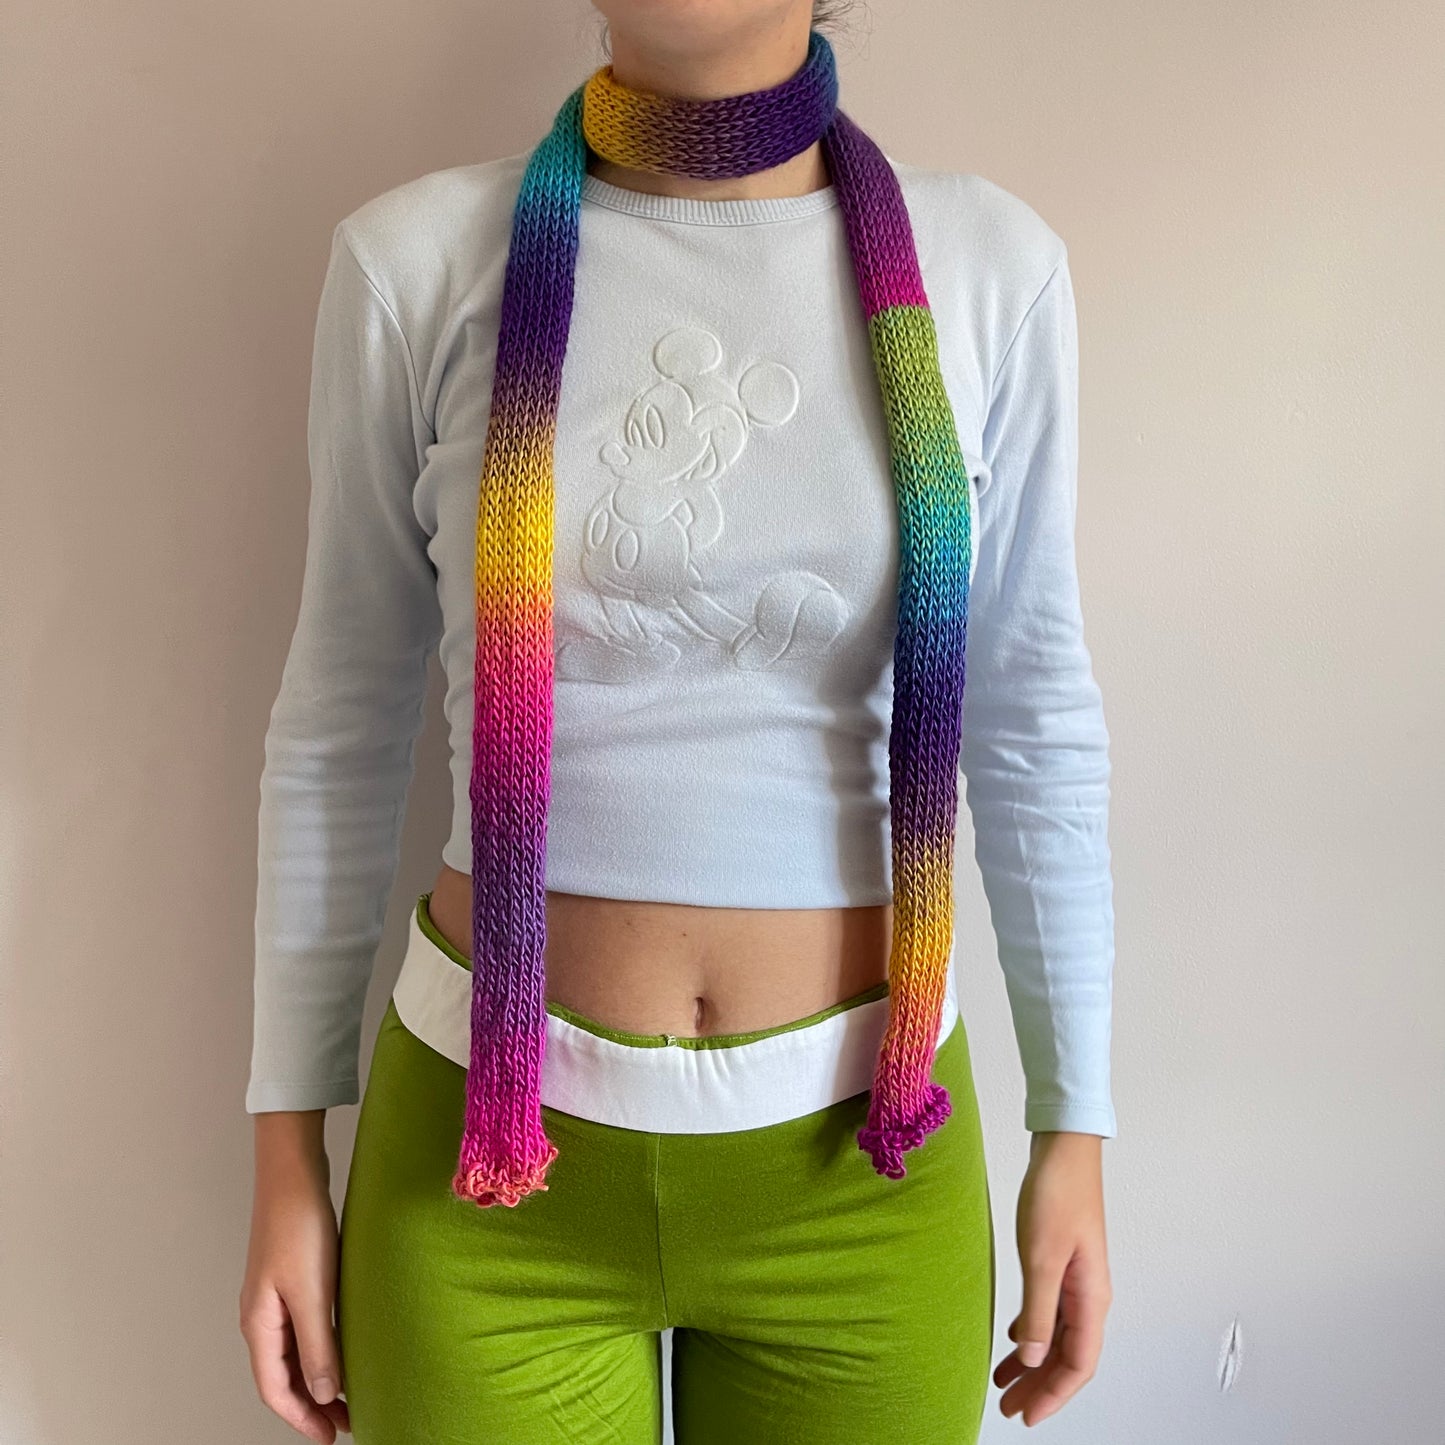 Handmade knitted ombré skinny scarf - Sunshine colourway